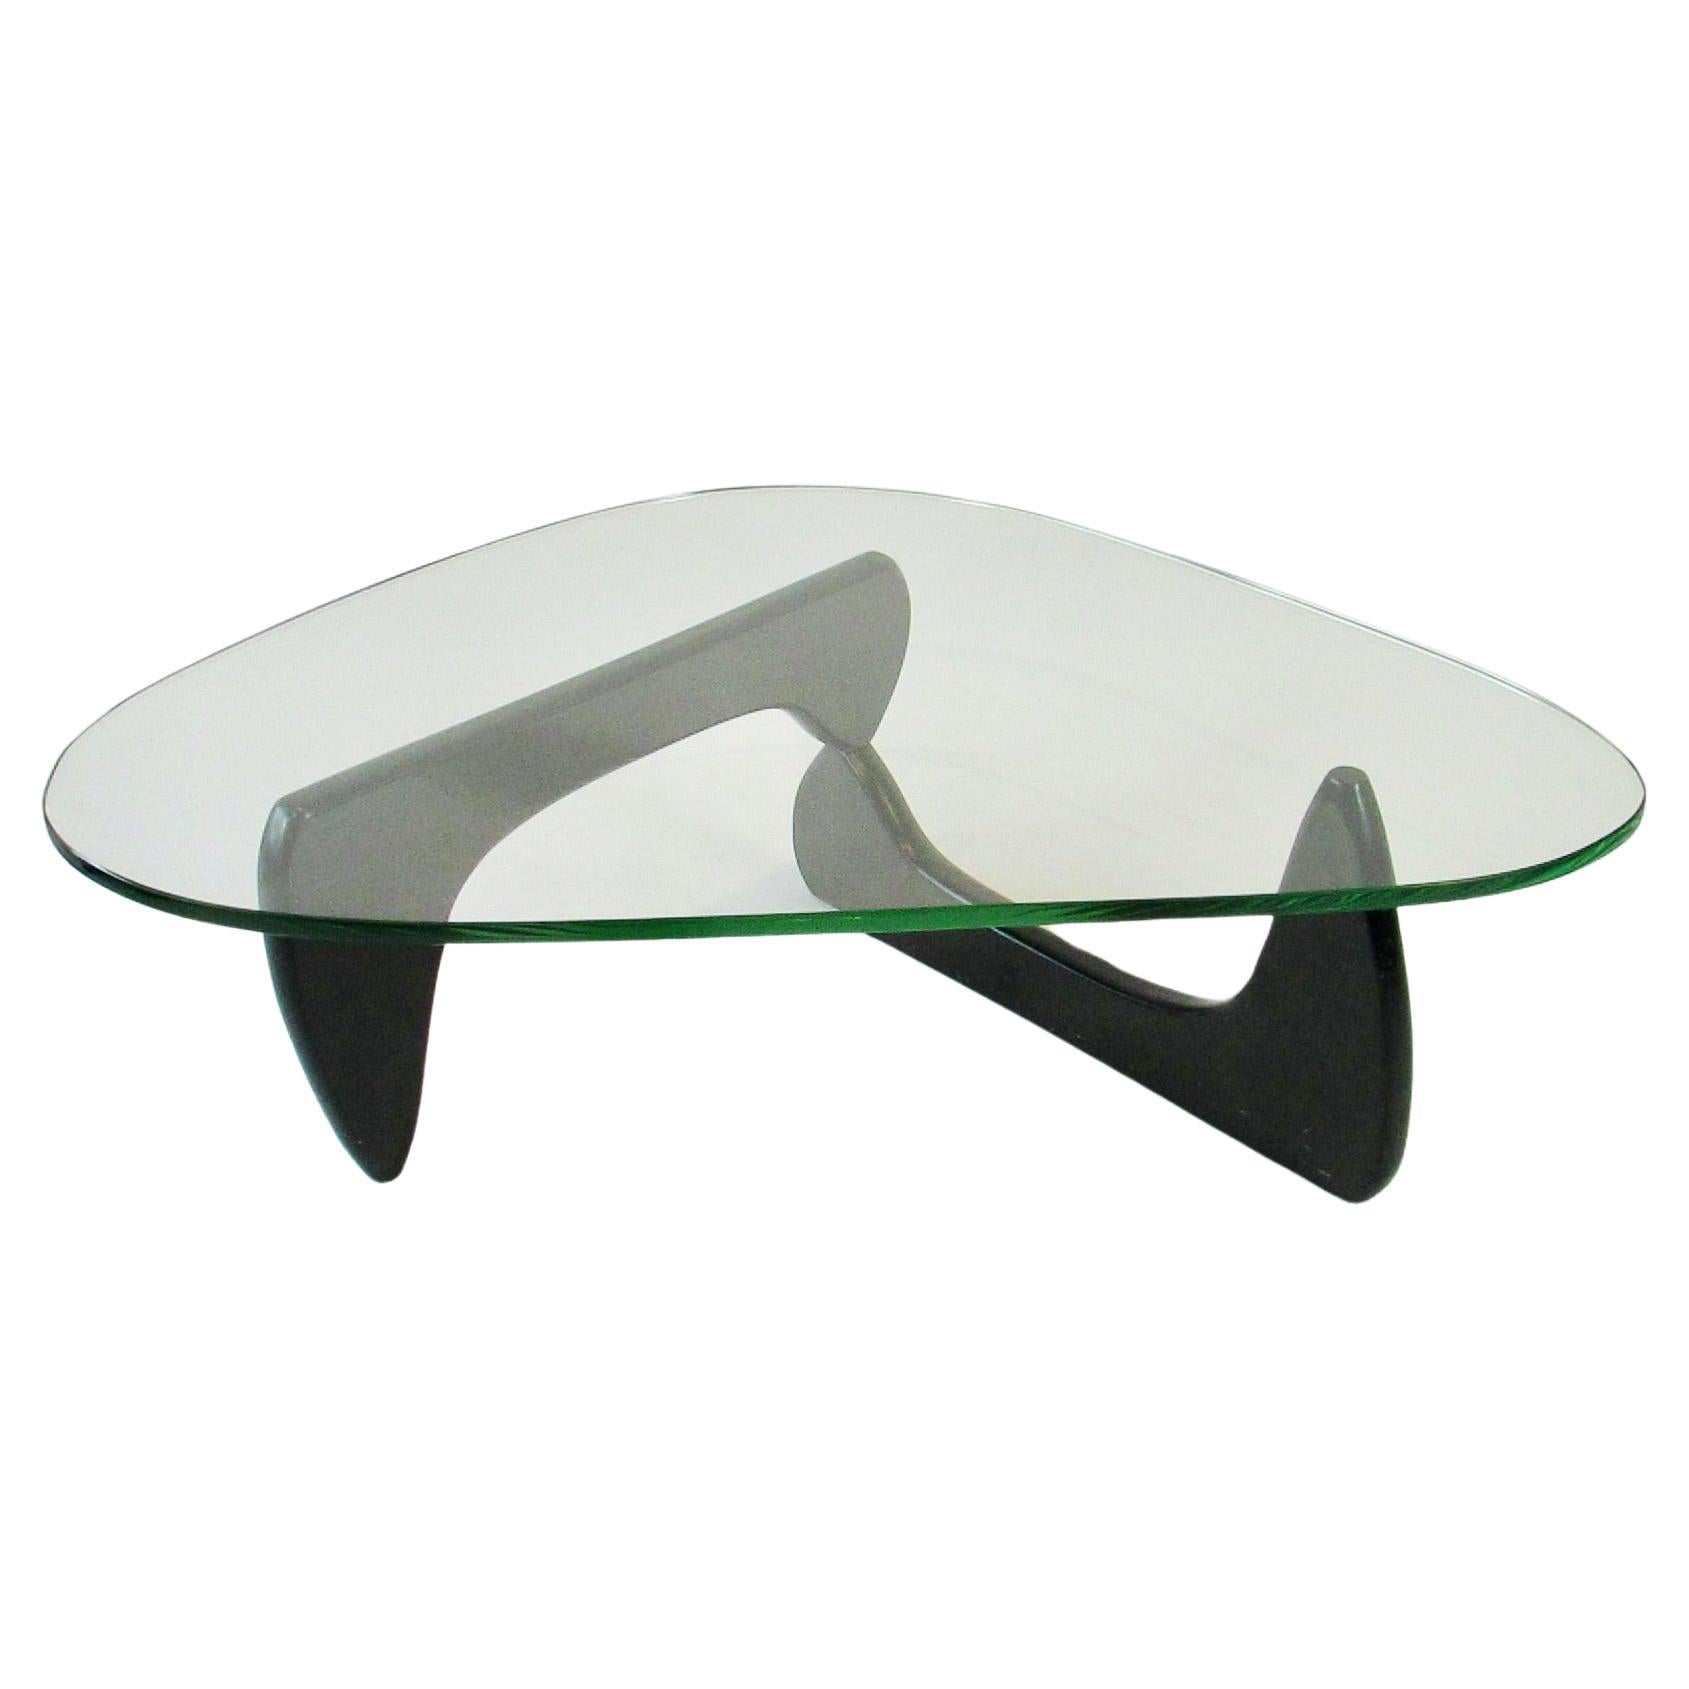 Where is the signature on a Noguchi table?